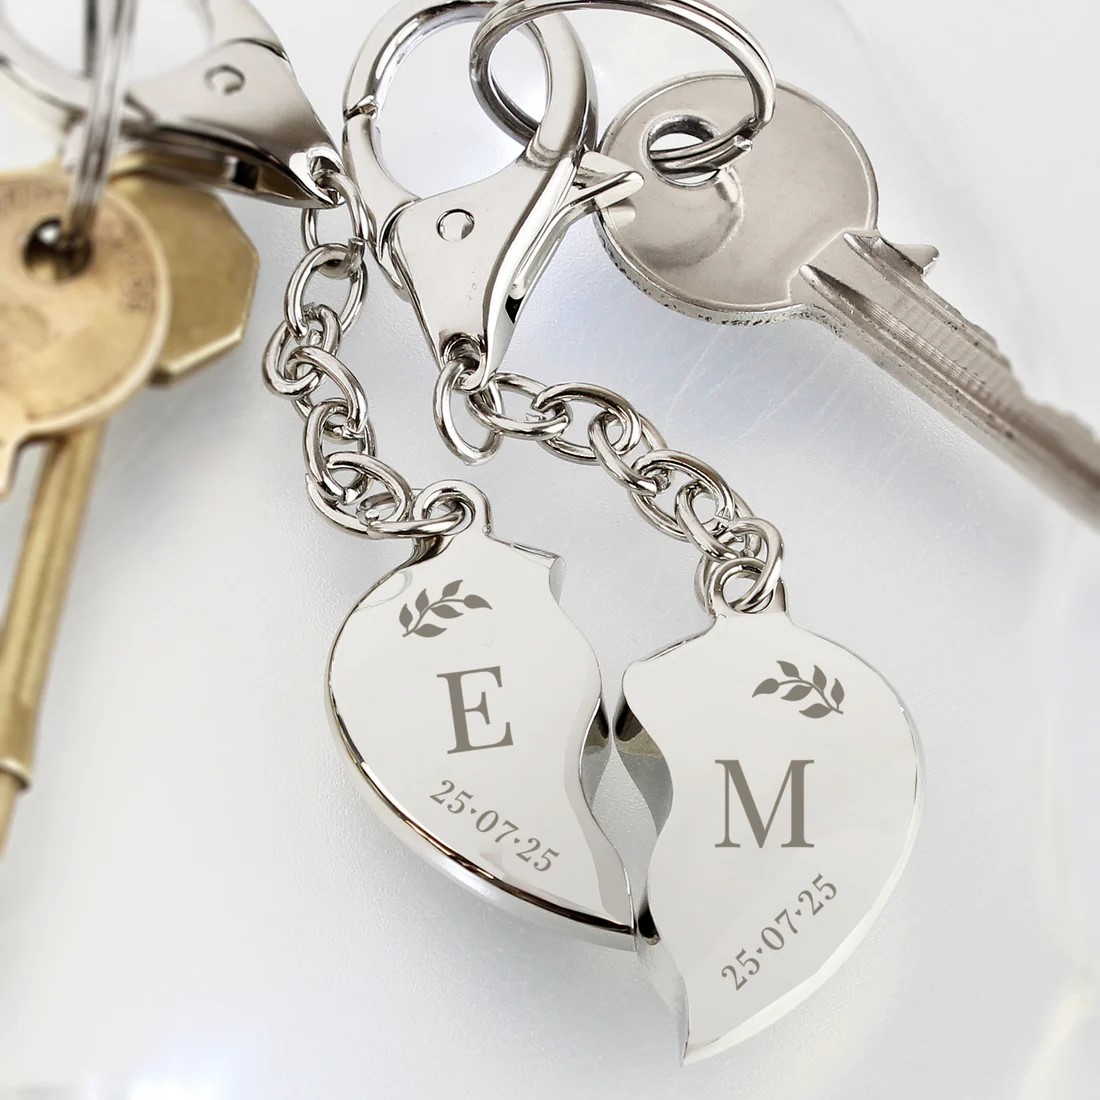 These personalised two hearts keyrings are a perfect gift for newly weds!

avenue47.com/products/perso…

#avenue47 #weddings #weddinggifts #brideandgroomgifts #weddingpresents #bridegifts #groomgifts